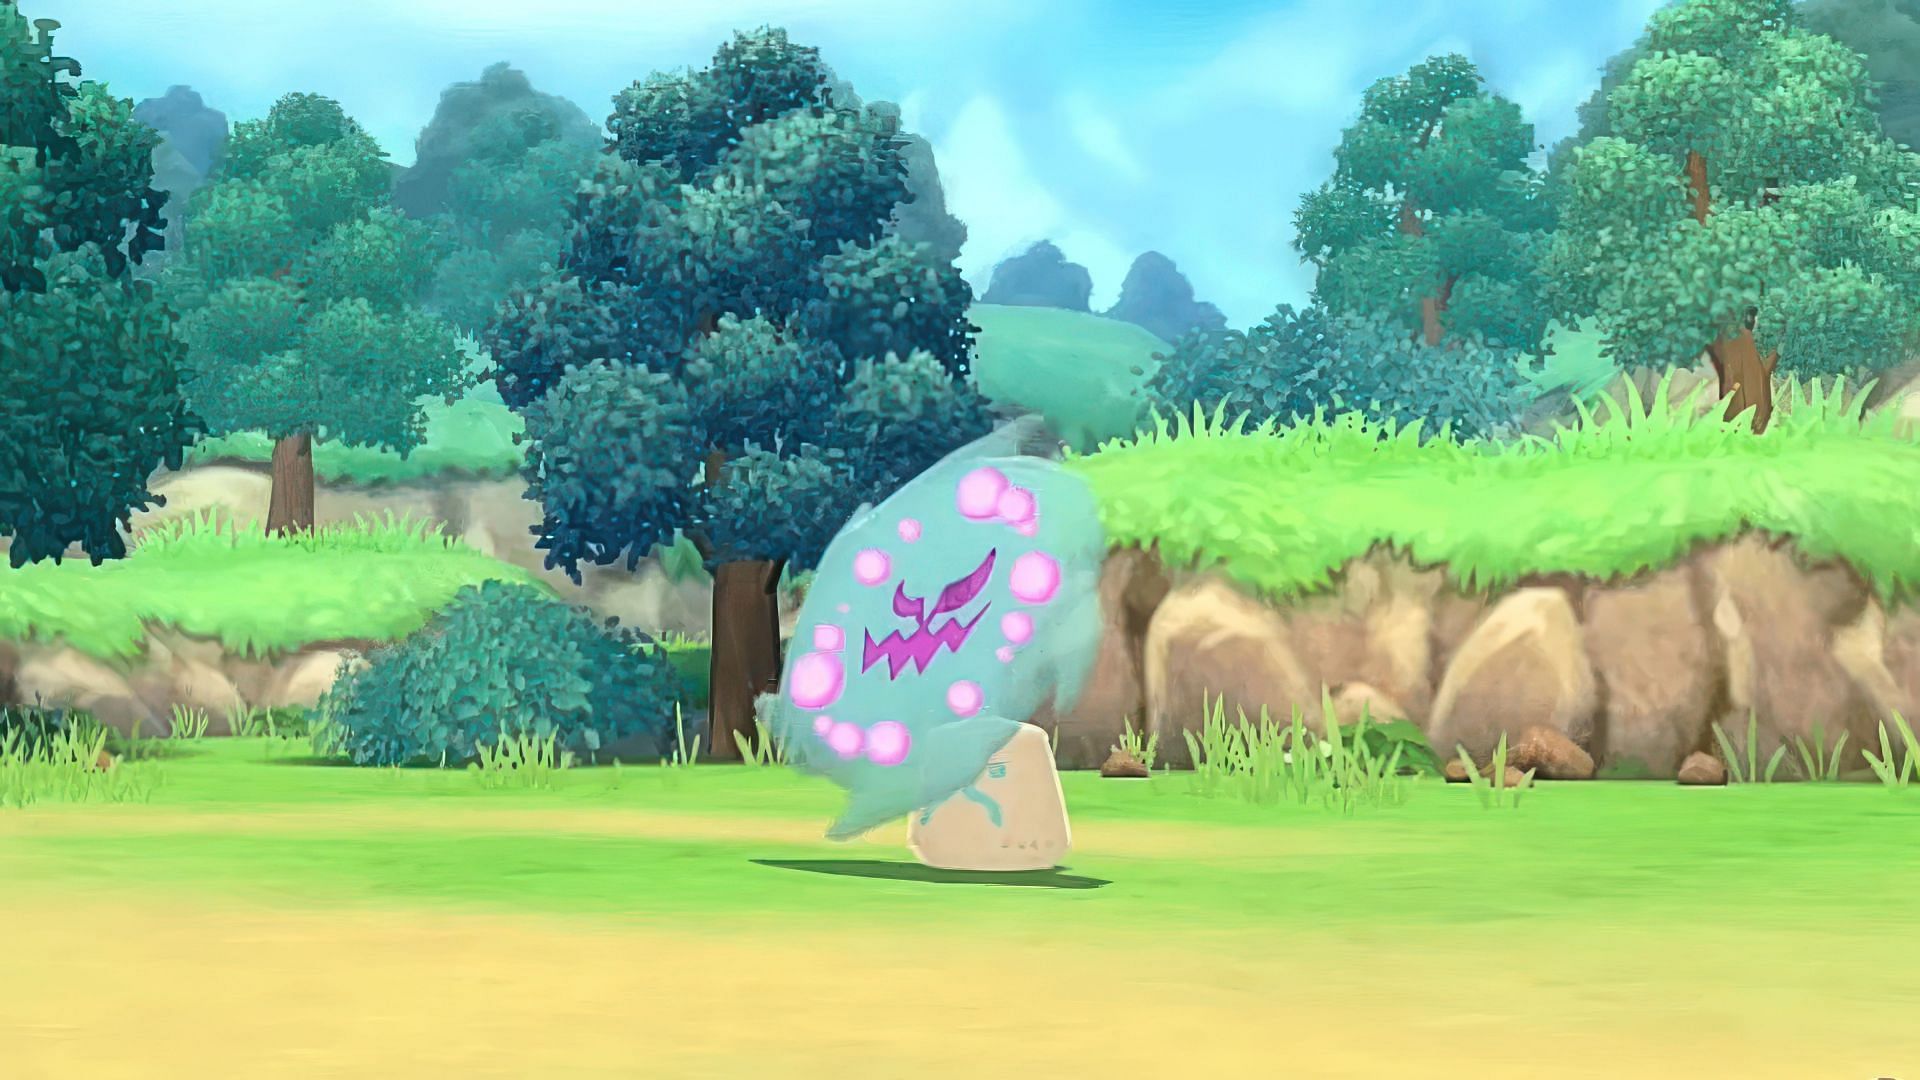 Spiritomb encounter can be shiny from the paid research. : r